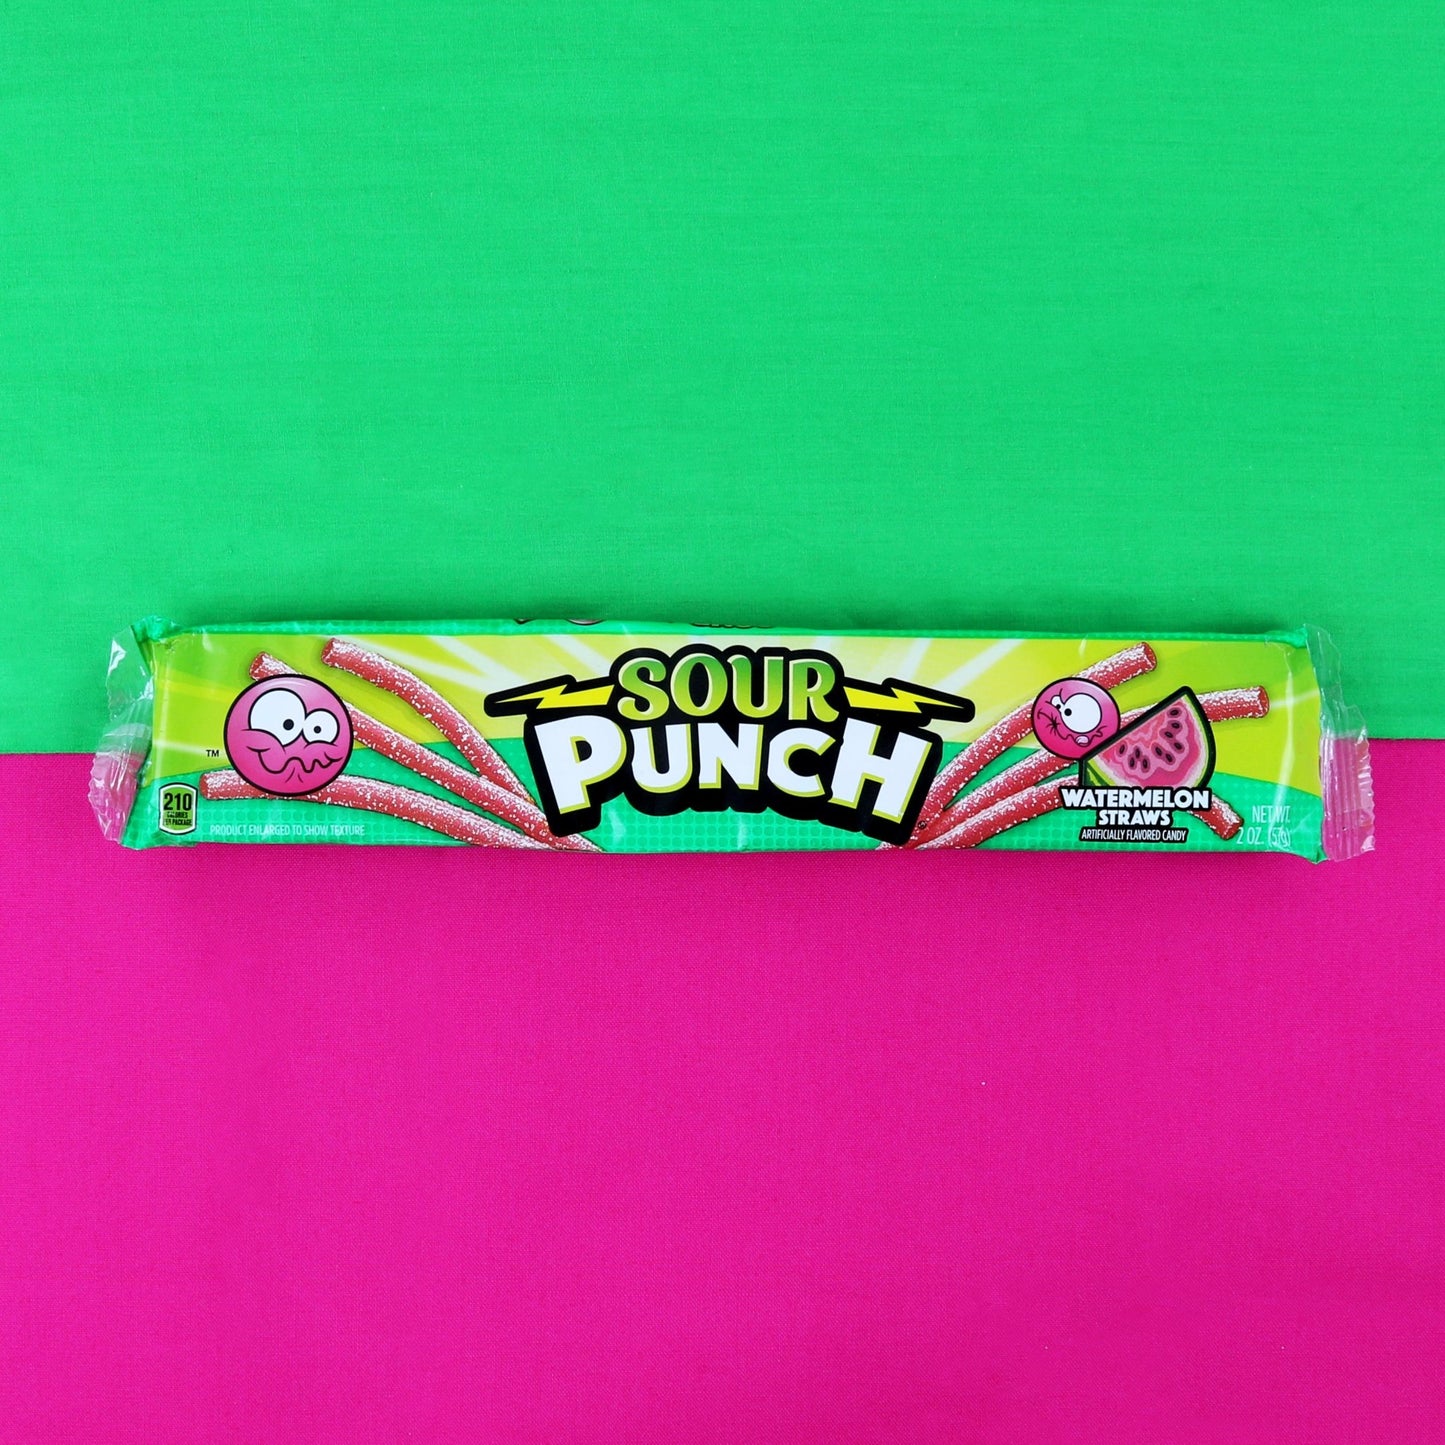 Sour Punch Watermelon Straws 2oz Movie Tray on a watermelon colored background